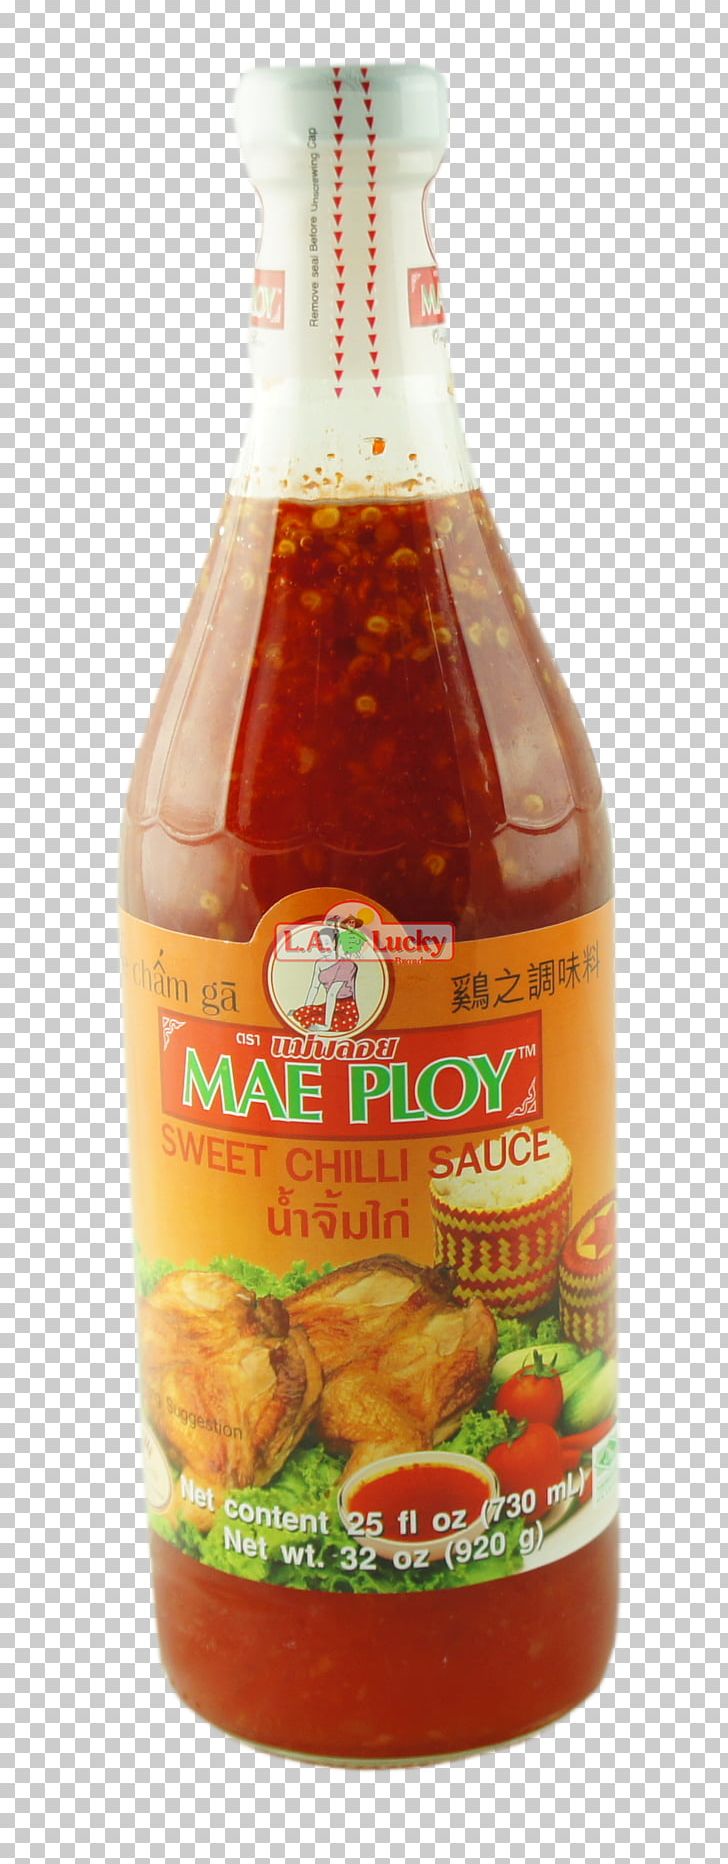 Sweet Chili Sauce Hot Sauce Ketchup PNG, Clipart, Bottle, Btl, Chili, Chili Sauce, Condiment Free PNG Download